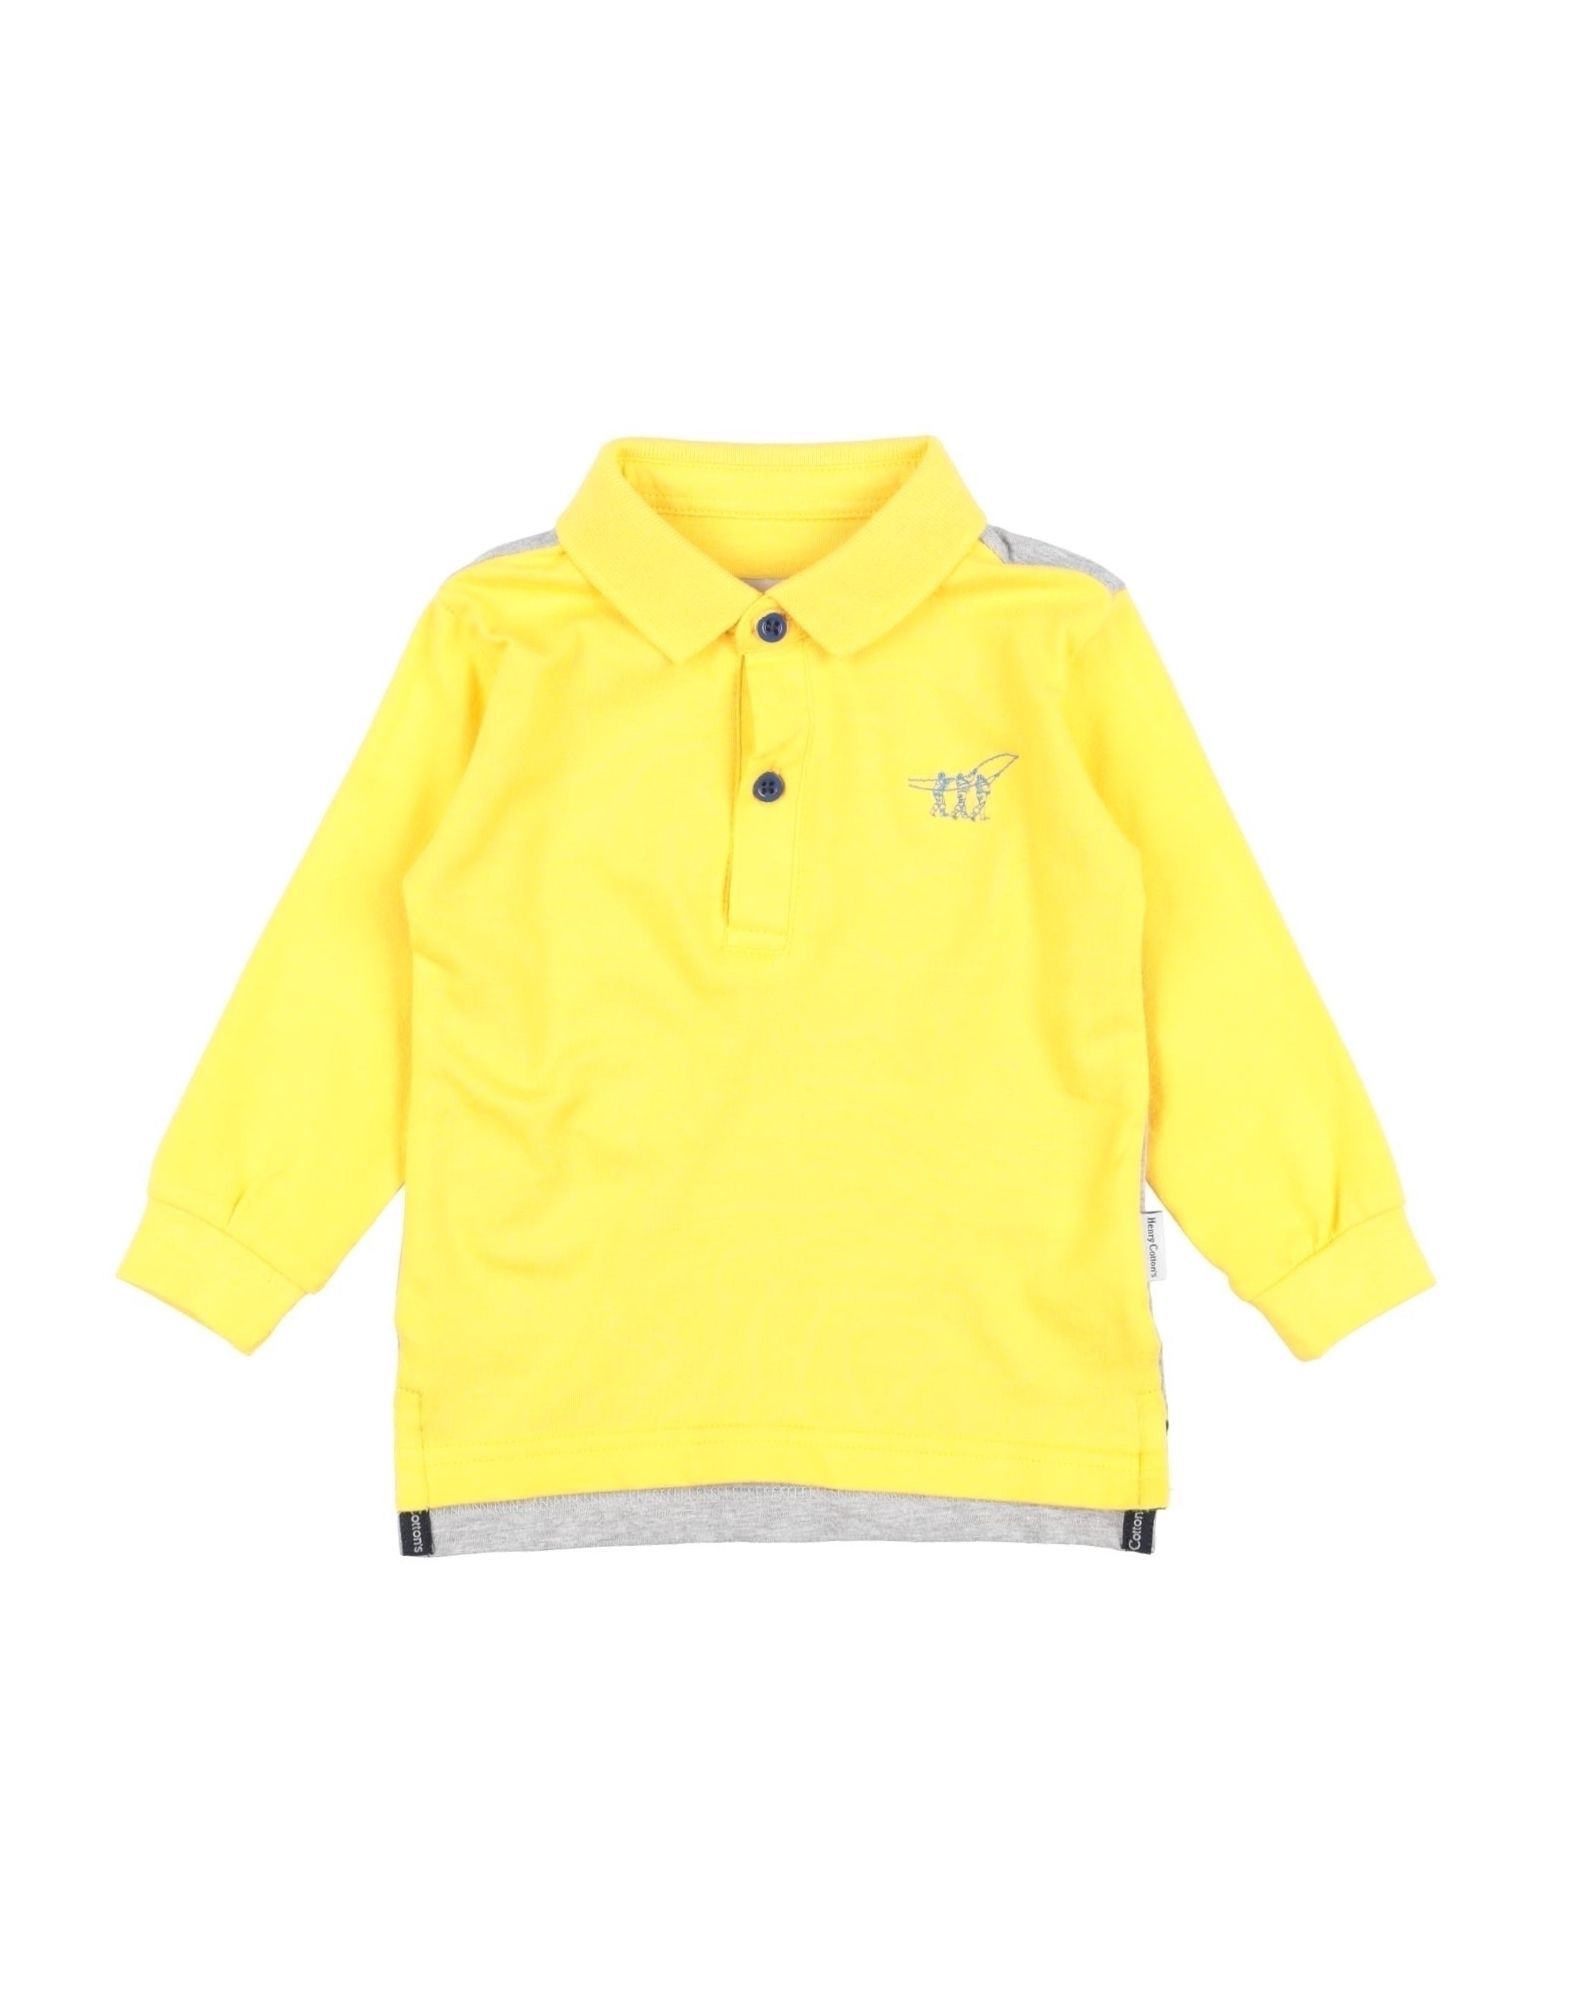 Henry Cotton's Kids' Polo Shirts In Yellow